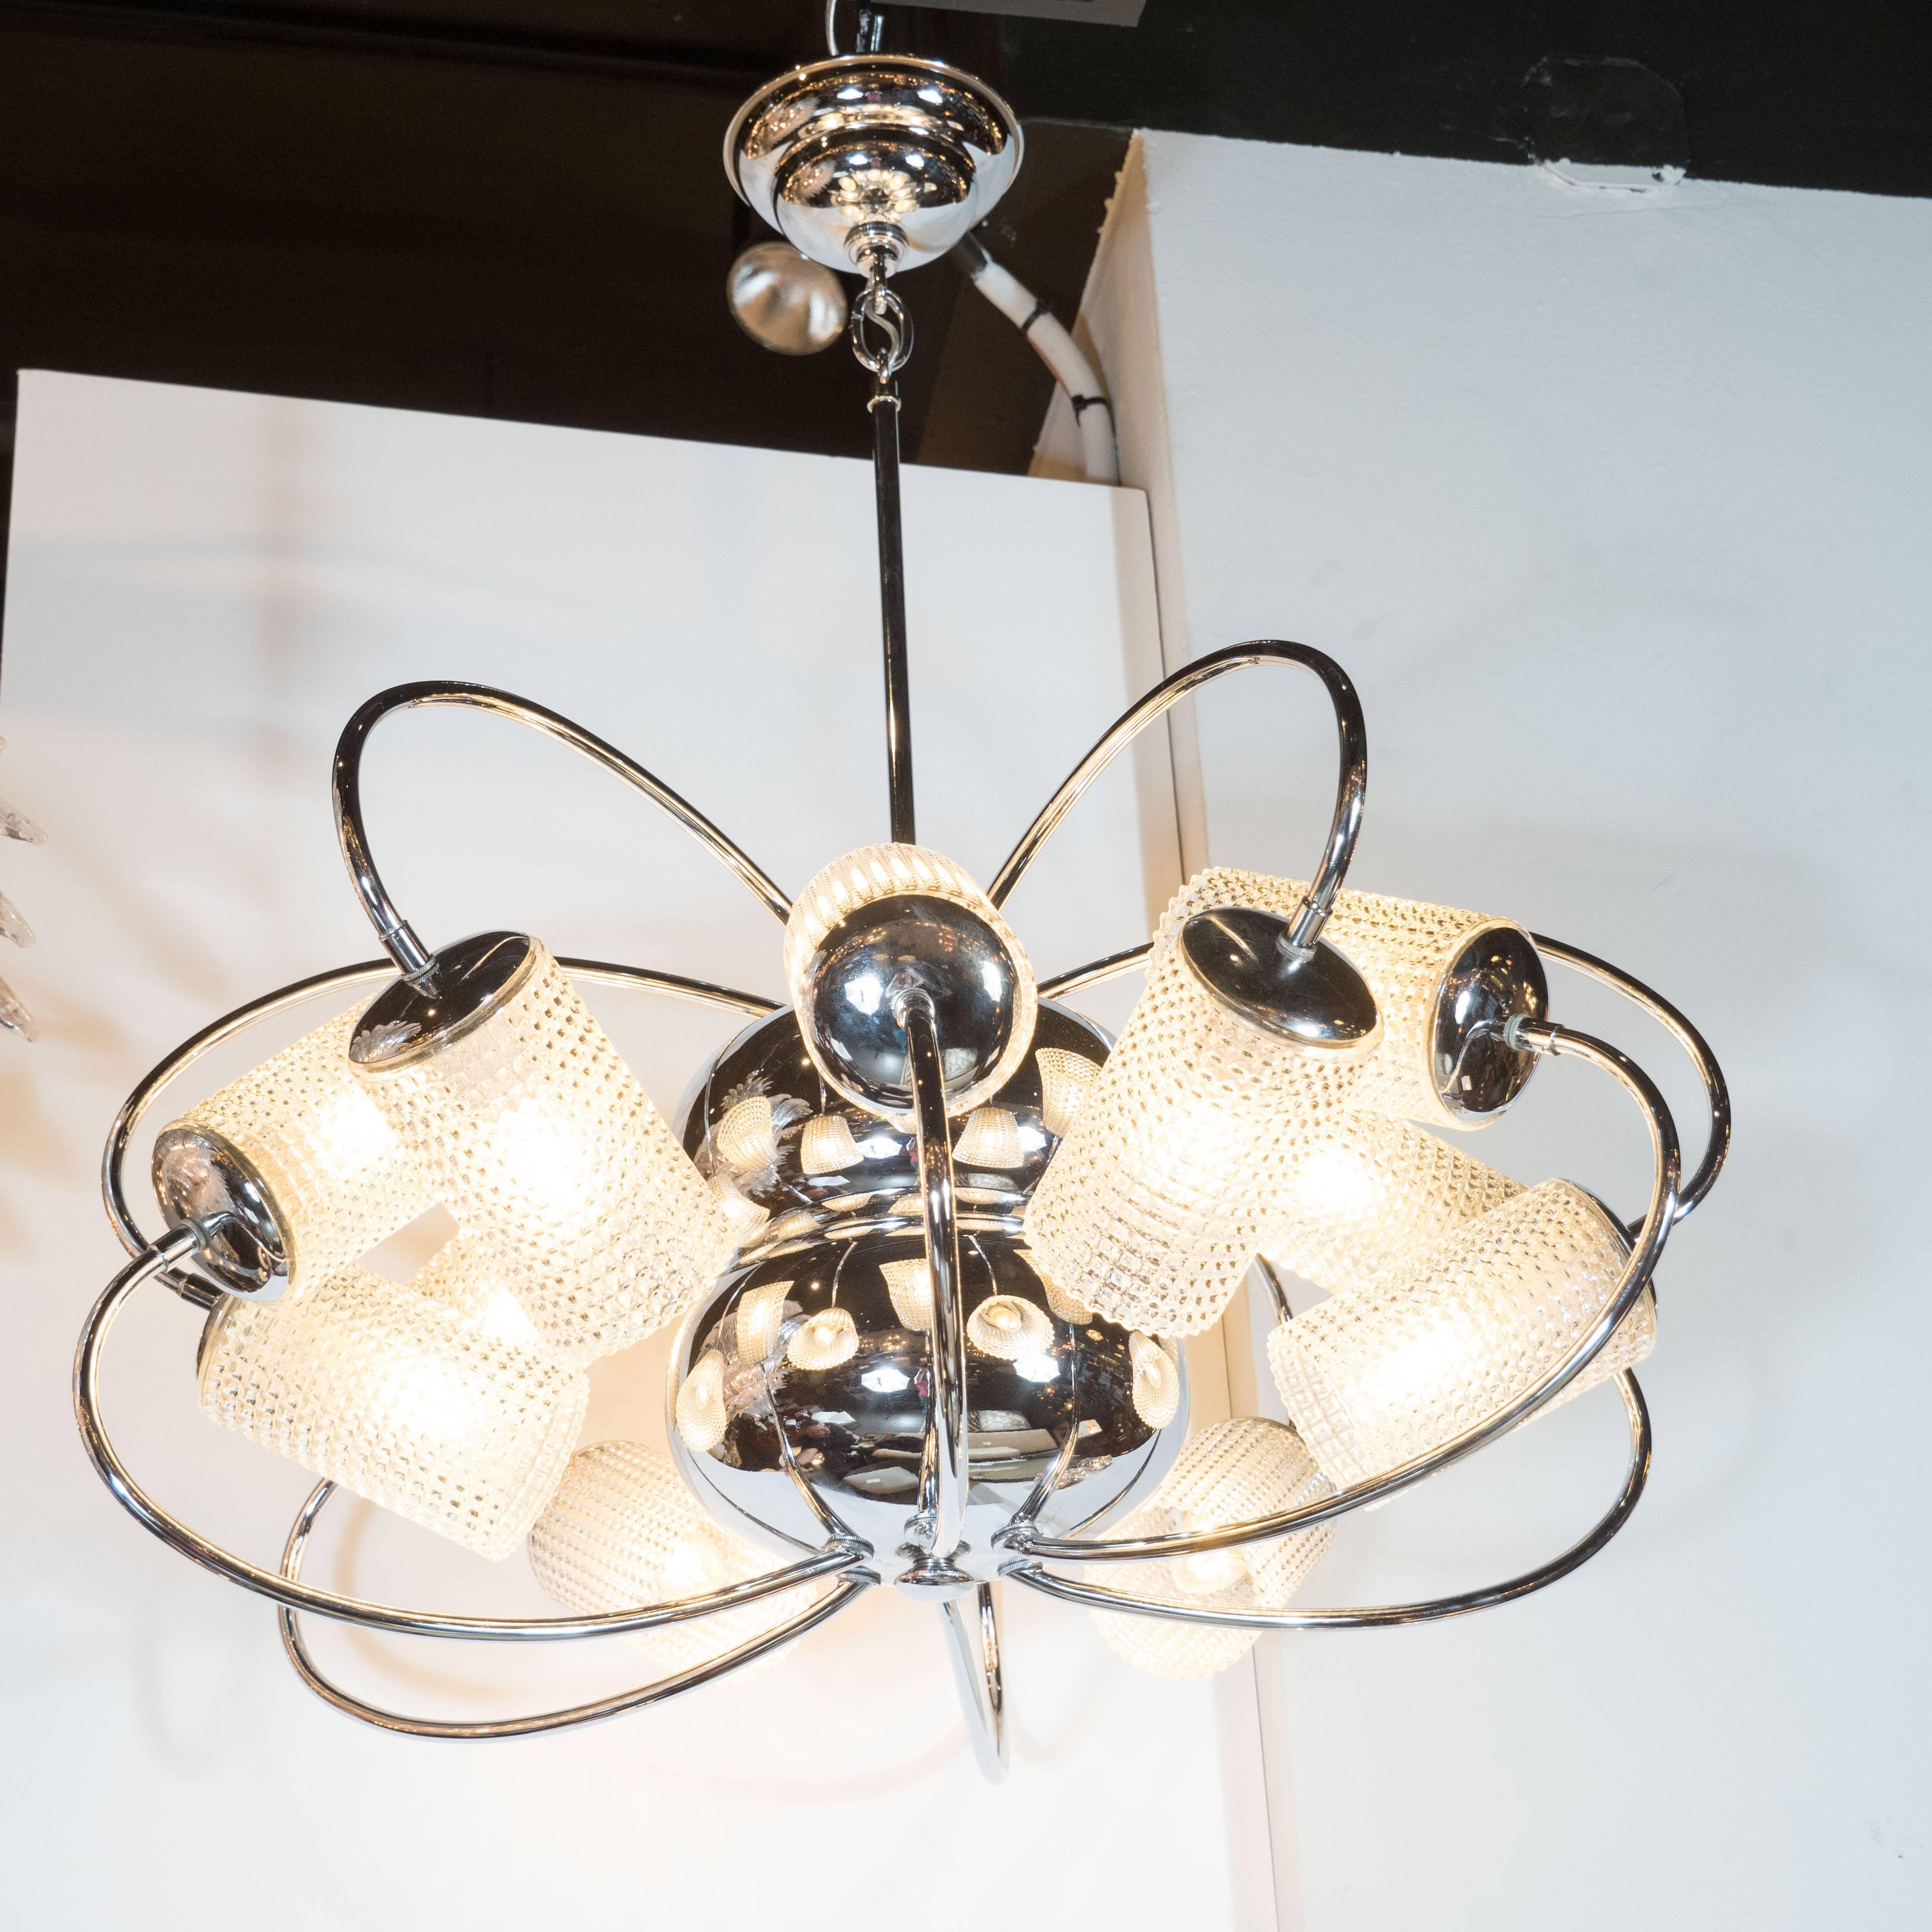 This stunning chandelier realized, circa 1950 in Italy- represents an exceptionally Fine example of the time and place. Resembling an oversized atom, the piece features twelve curved arms (six above and six below) connected to a central body